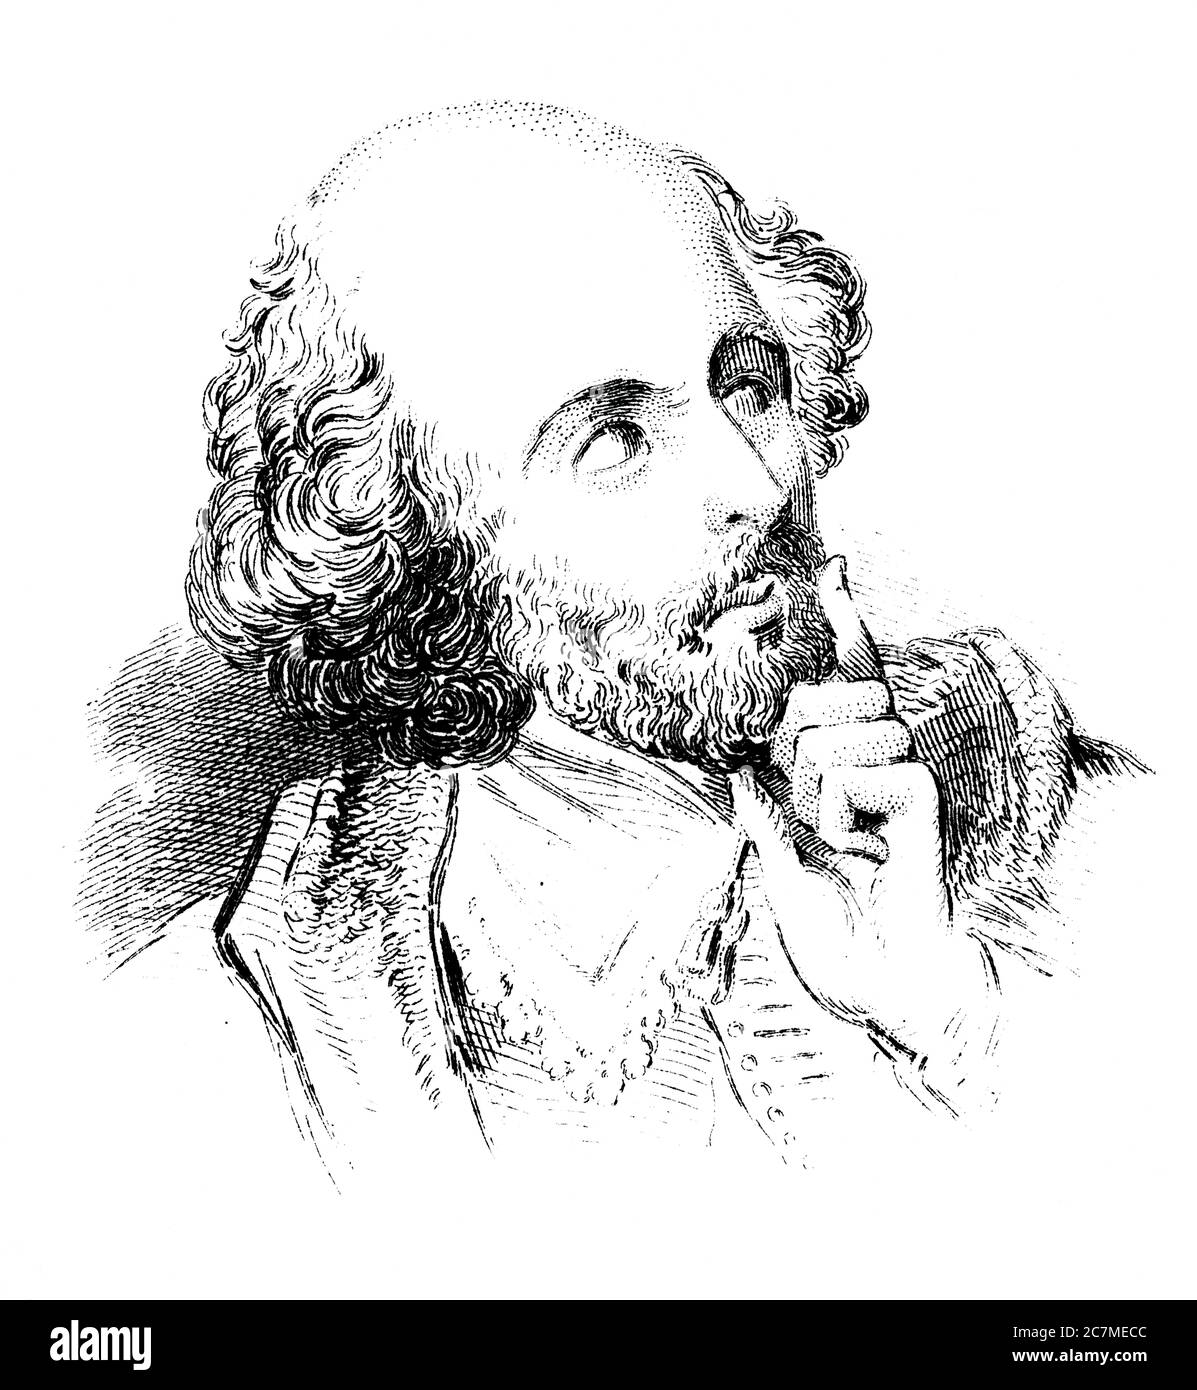 An engraved vintage illustration image portrait of the Elizabethan playwright William Shakespeare  from a Victorian book dated 1856 that is no longer Stock Photo